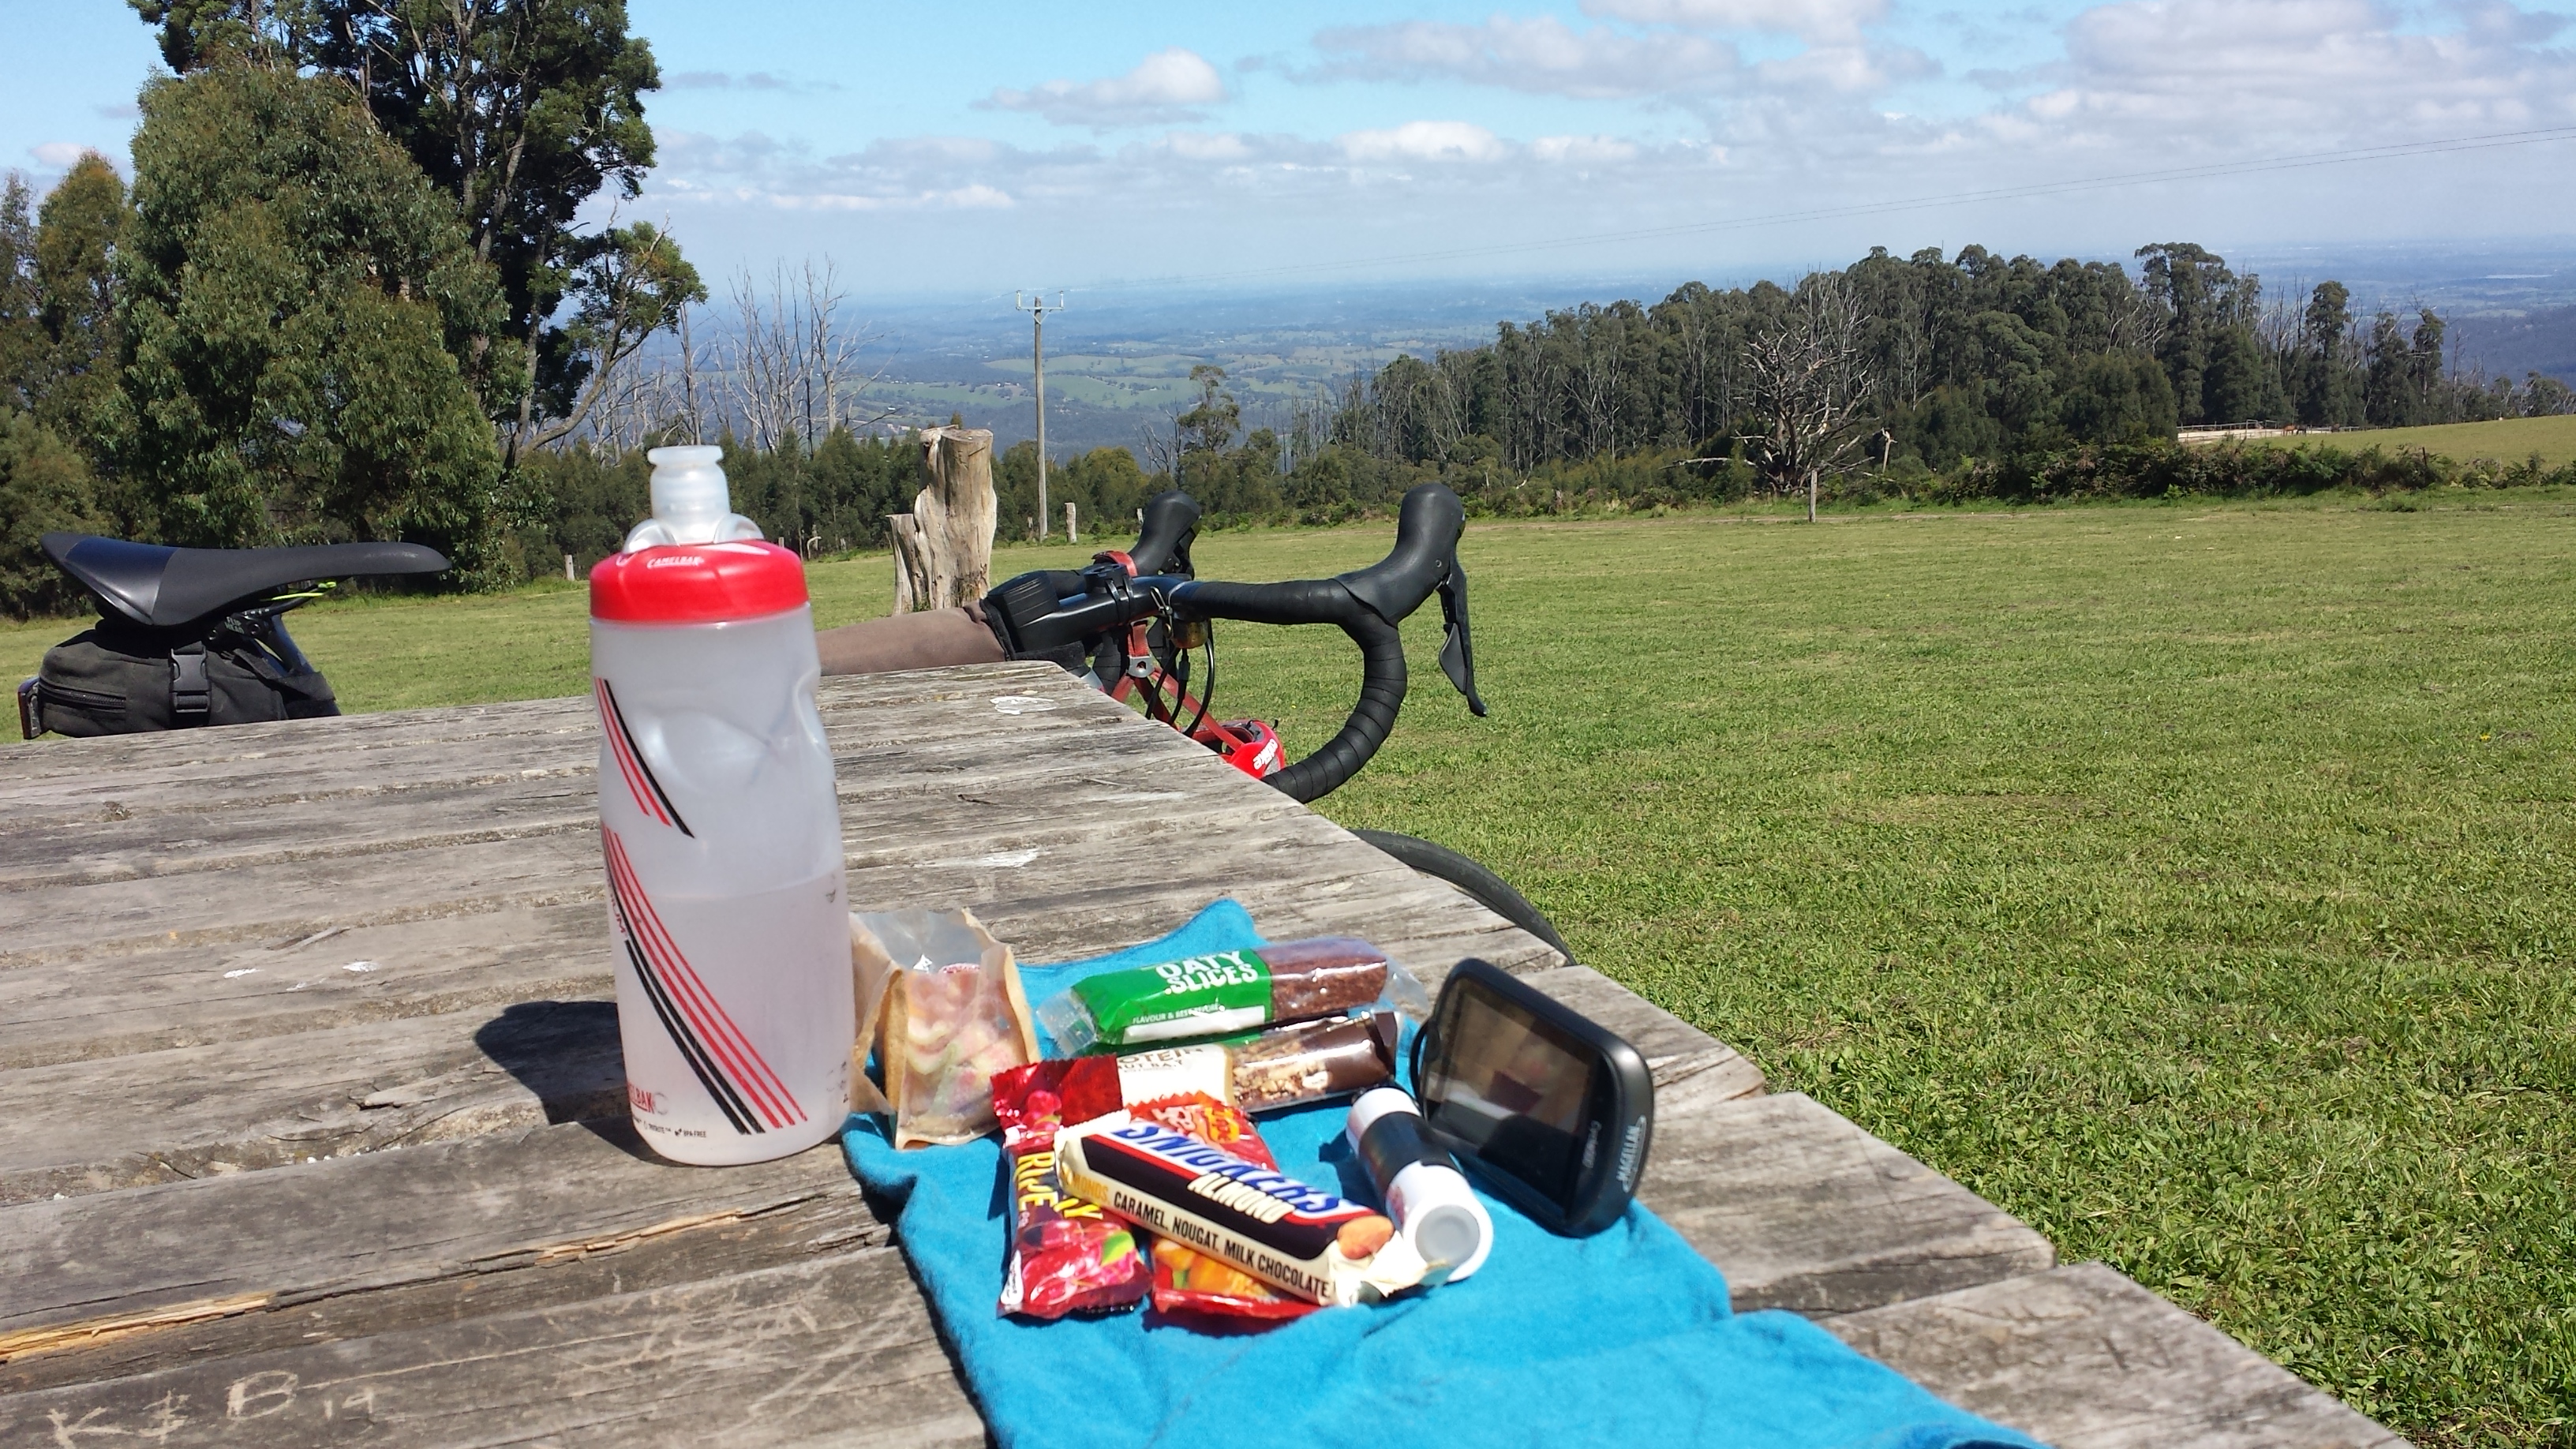 Picnic lunch, sunshine, bike and view over Melbourne from Kinglake